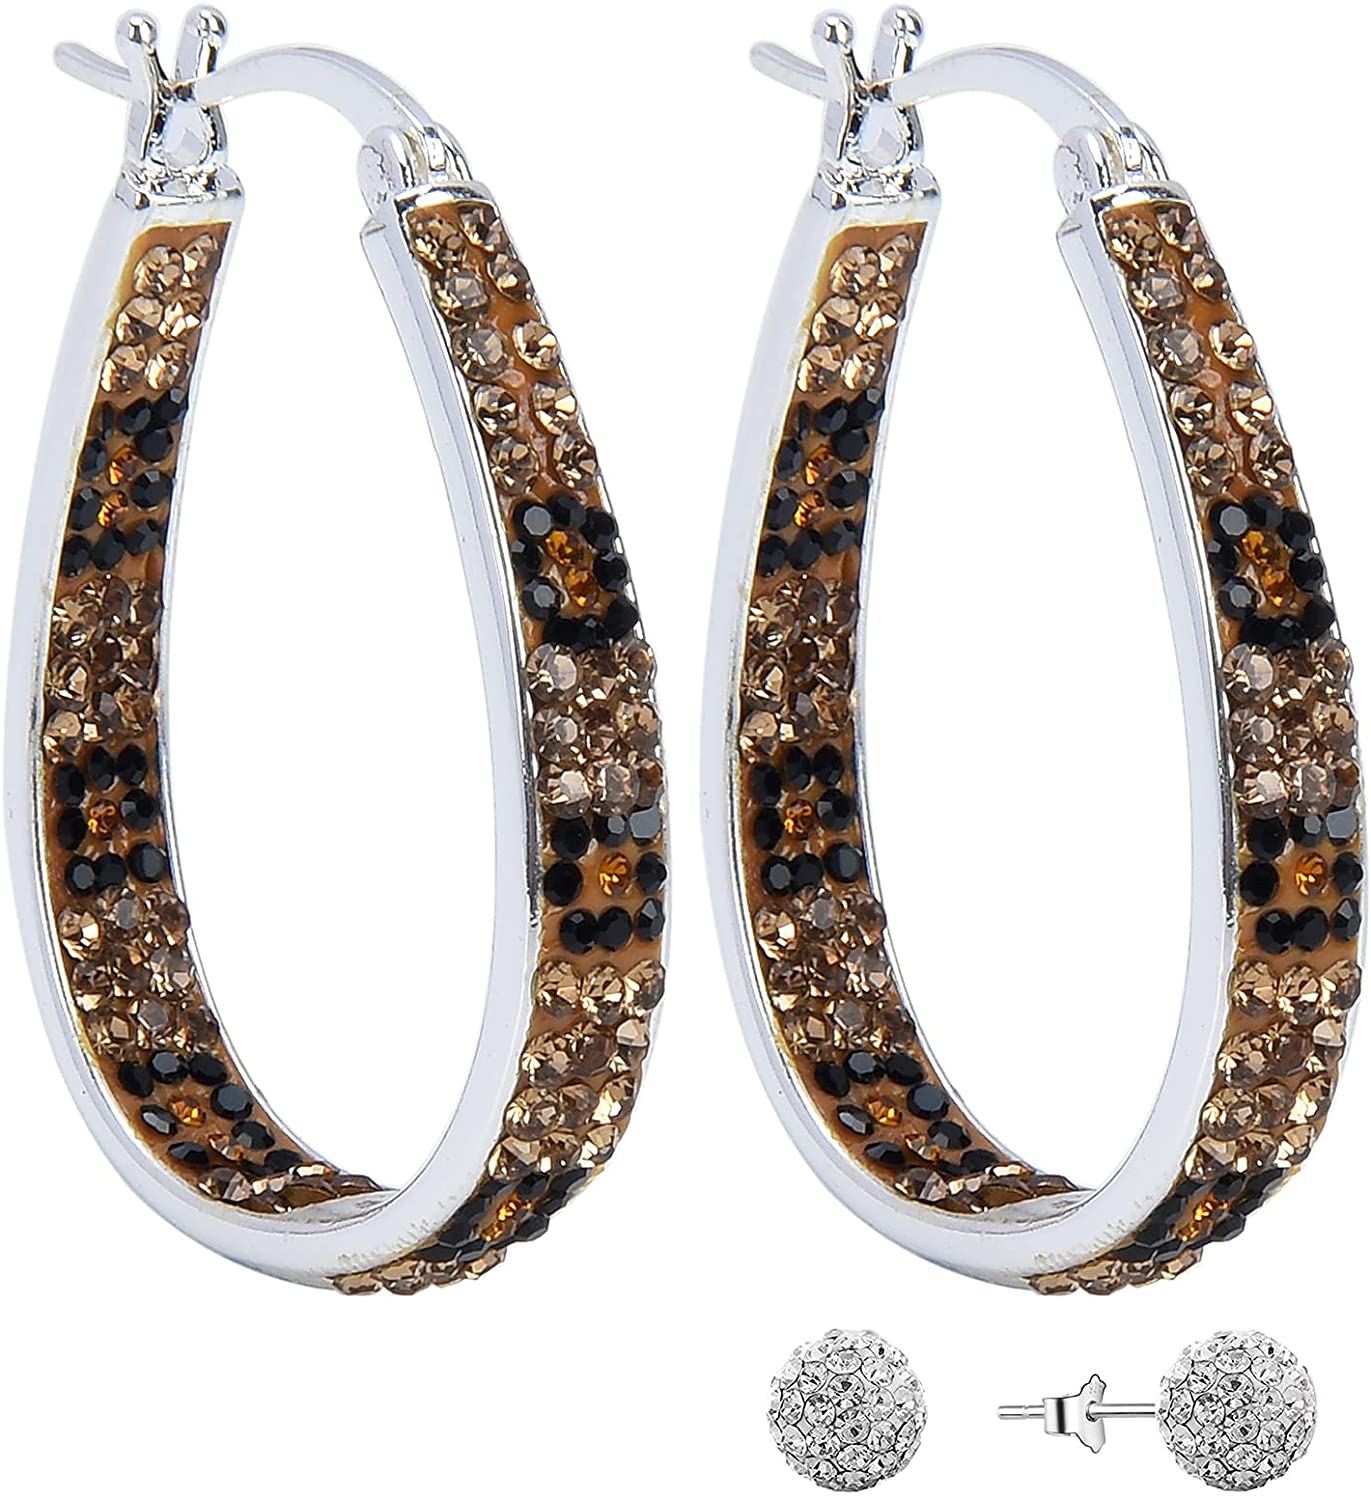 Crystal Hoop Earrings For Women Sparkly Earring Bright Silver Plated Oval Inside Out Earring Jewelry Gift